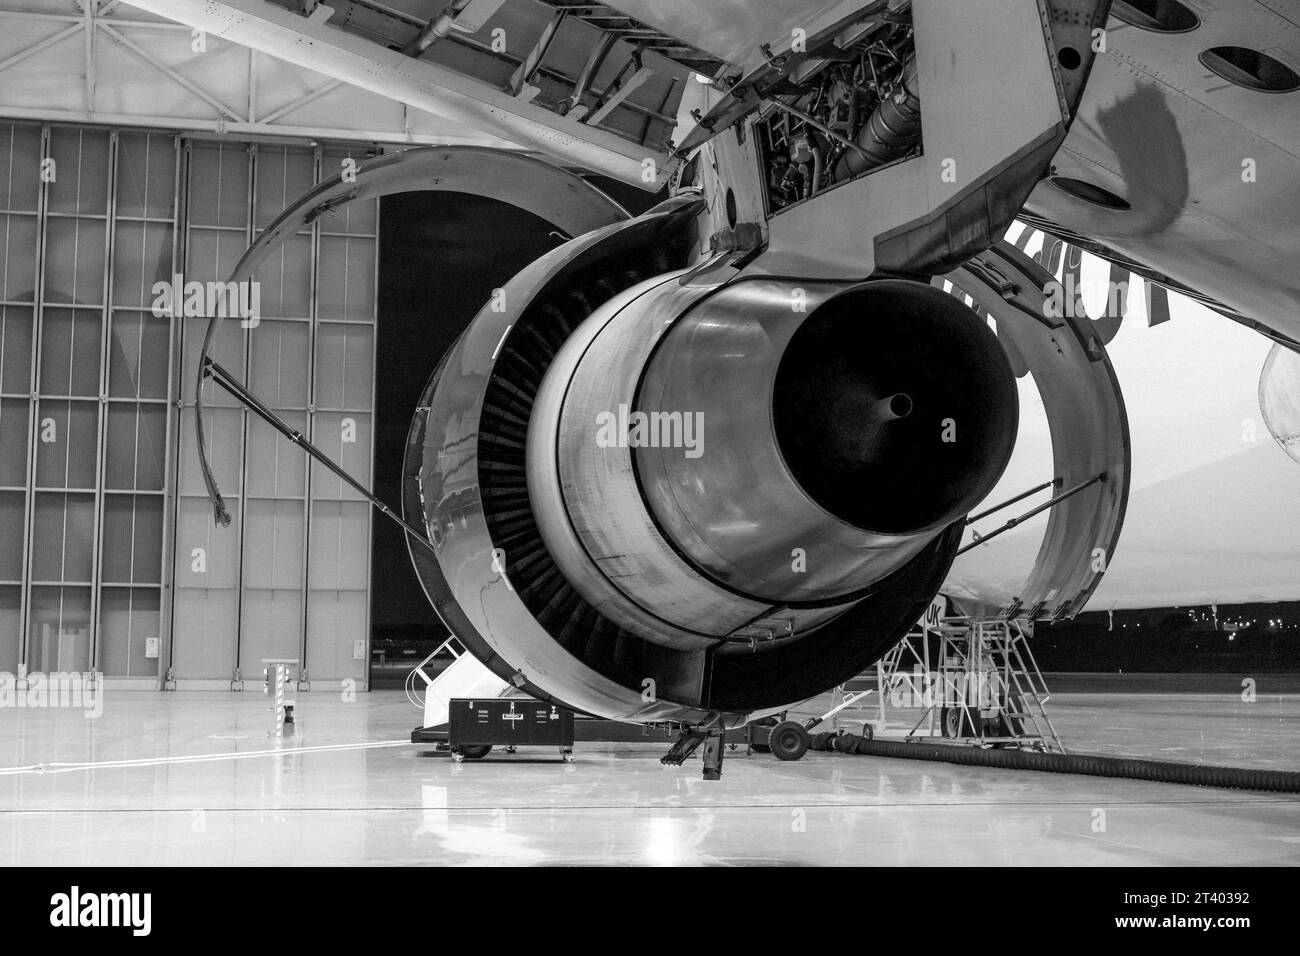 Airplane repairing in the hangar. Aircraft engine on the wing. Maintenance. Black and white photo. Stock Photo